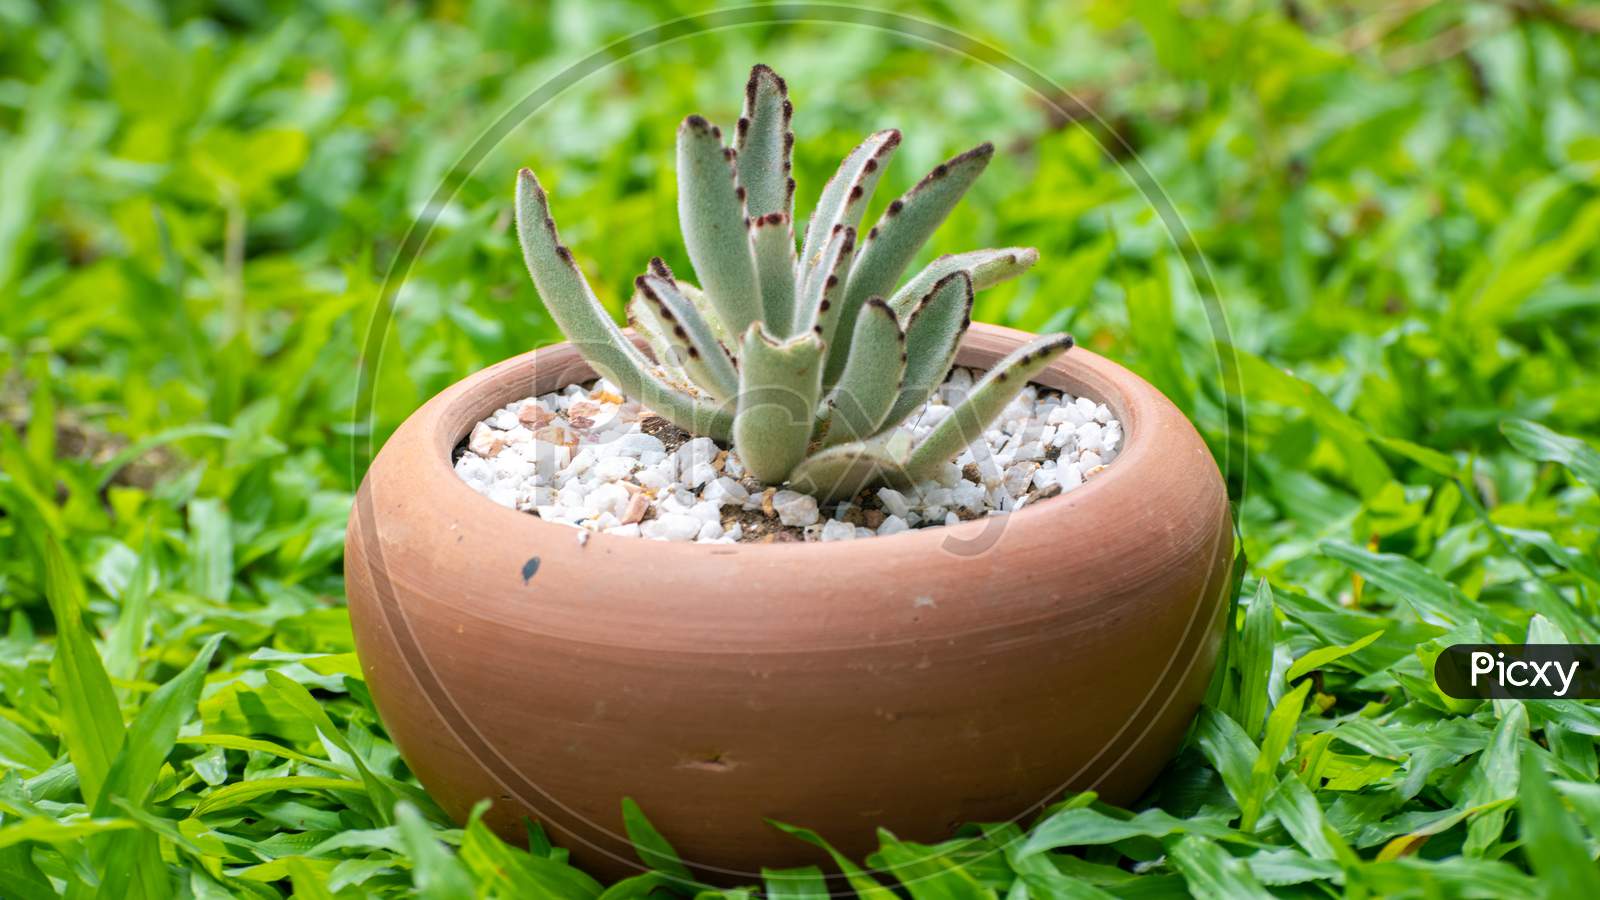 Small Cactus Plant In A Clay Pot With White Gravels In The Backyard On Top Of The Grass,